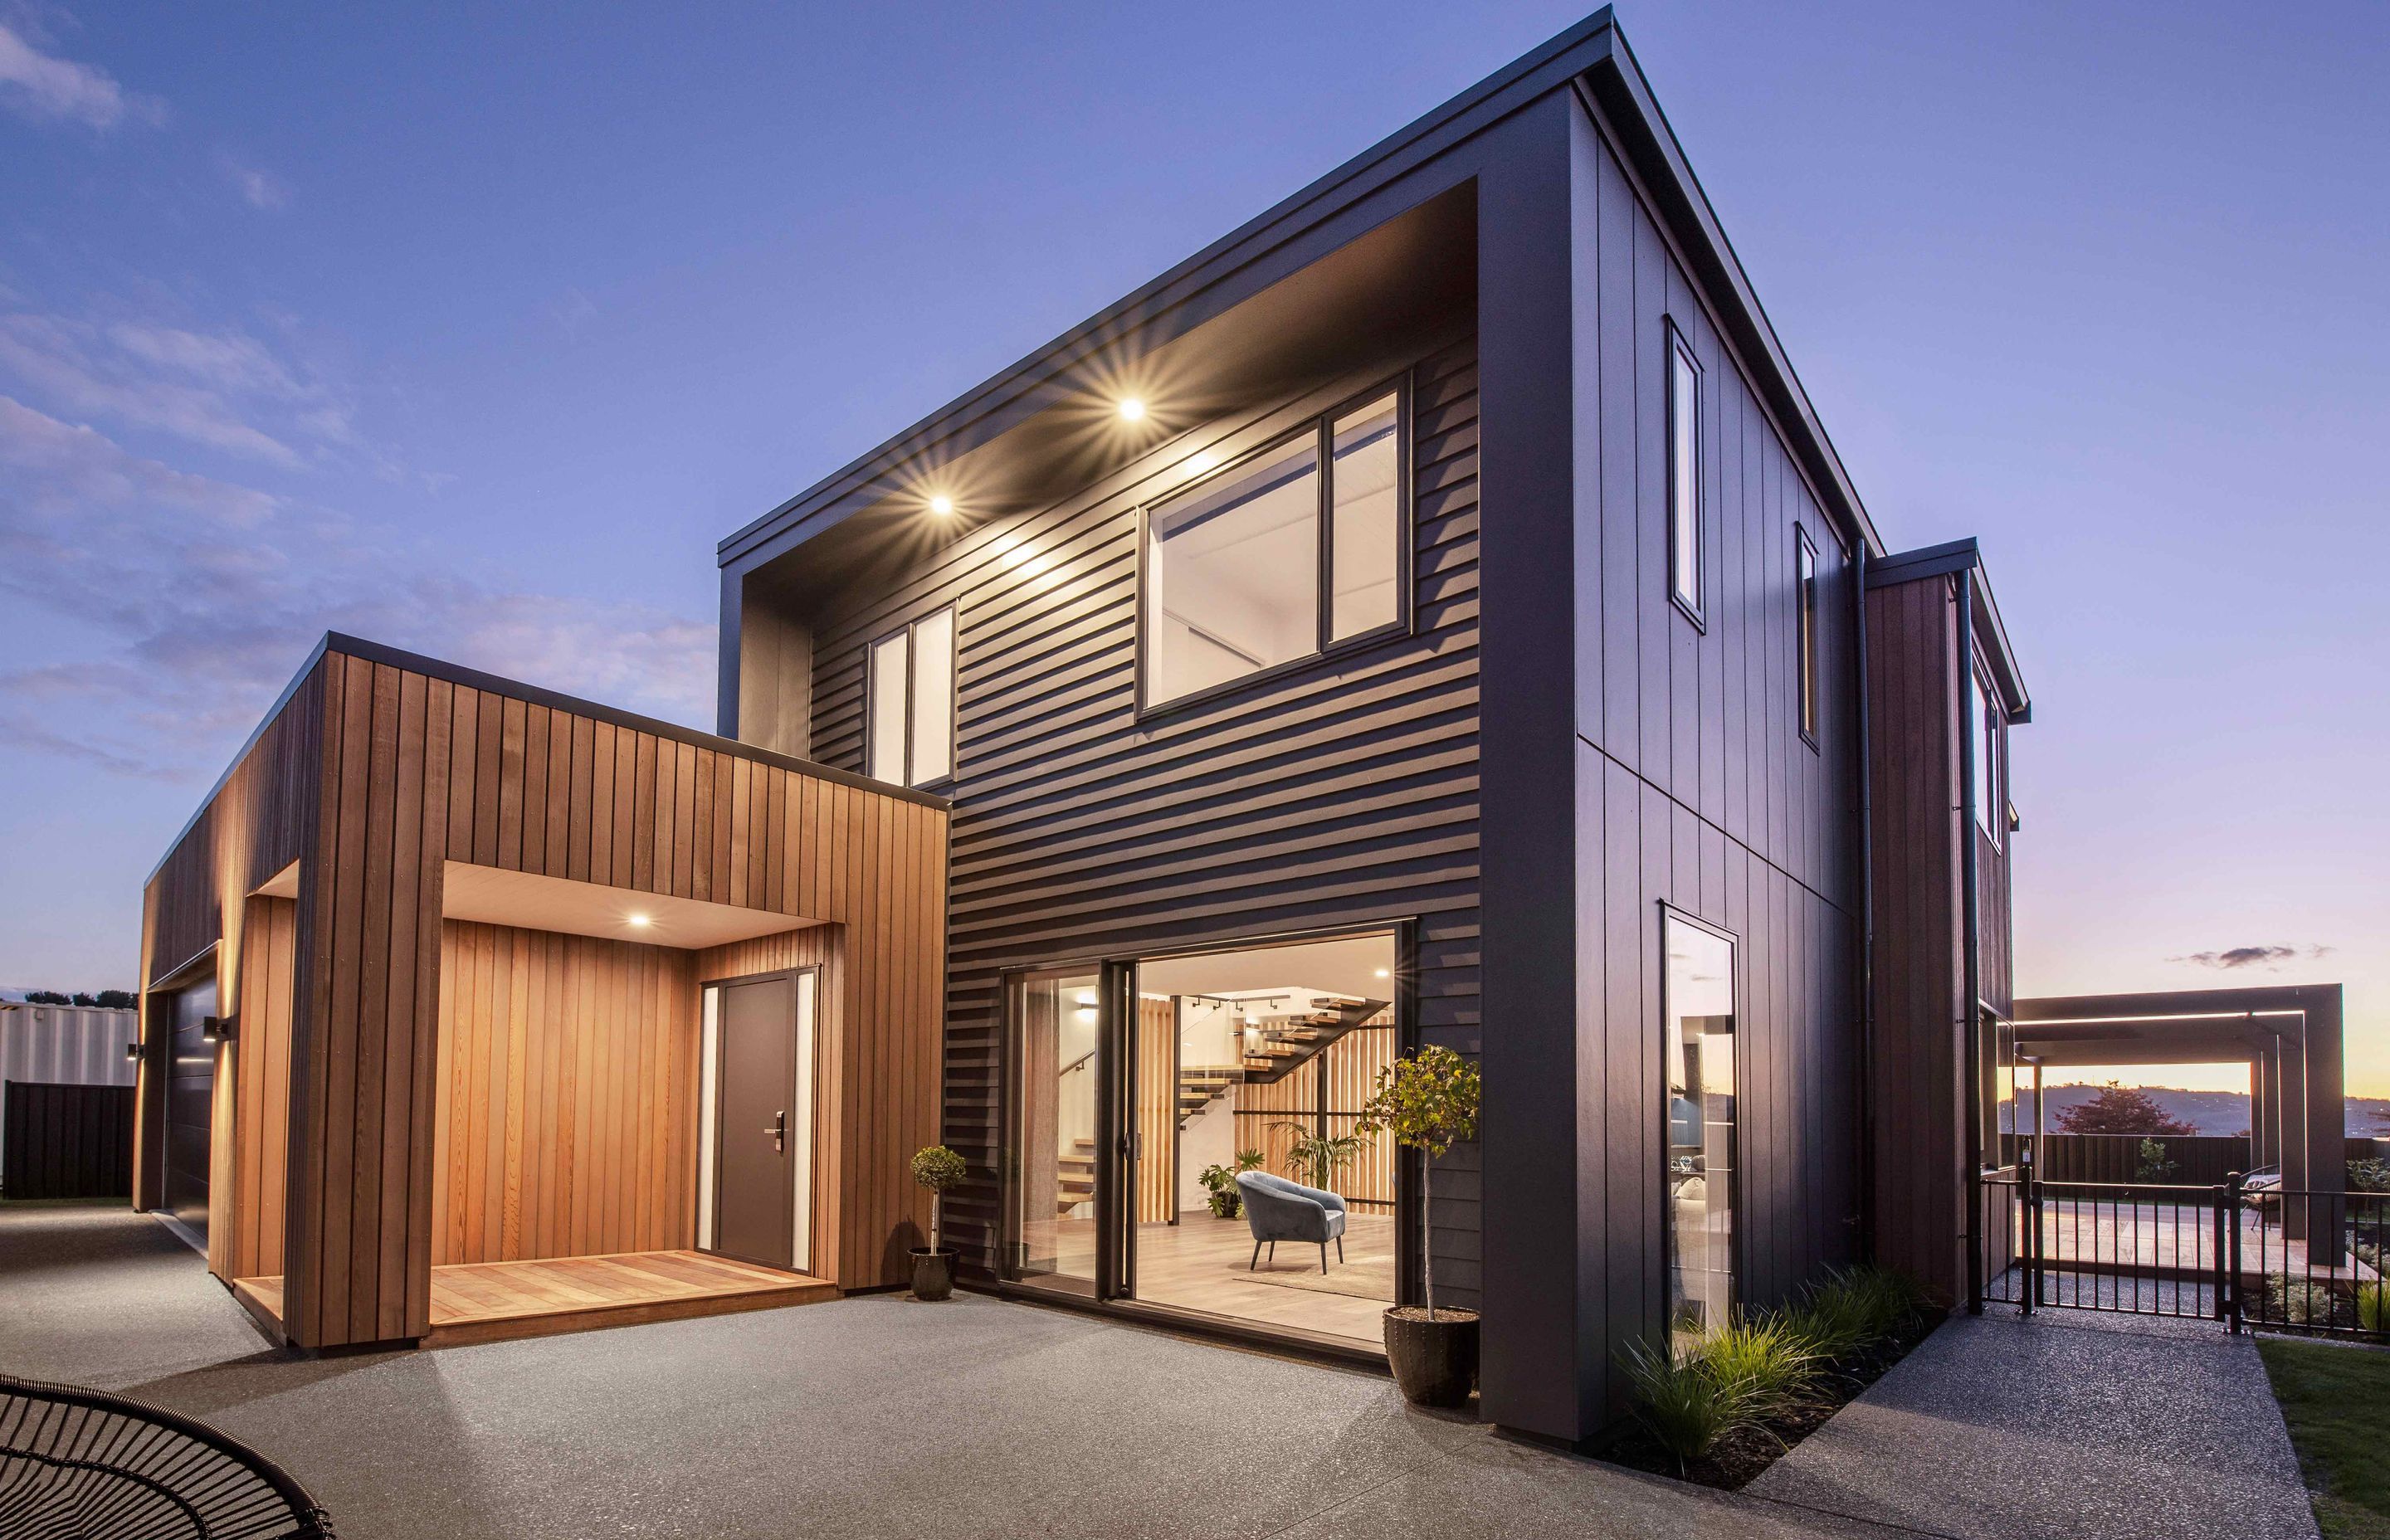 For the exterior, a mix of eye-catching materials was chosen, including vertical cedar, traditional weatherboards and Stria panels.